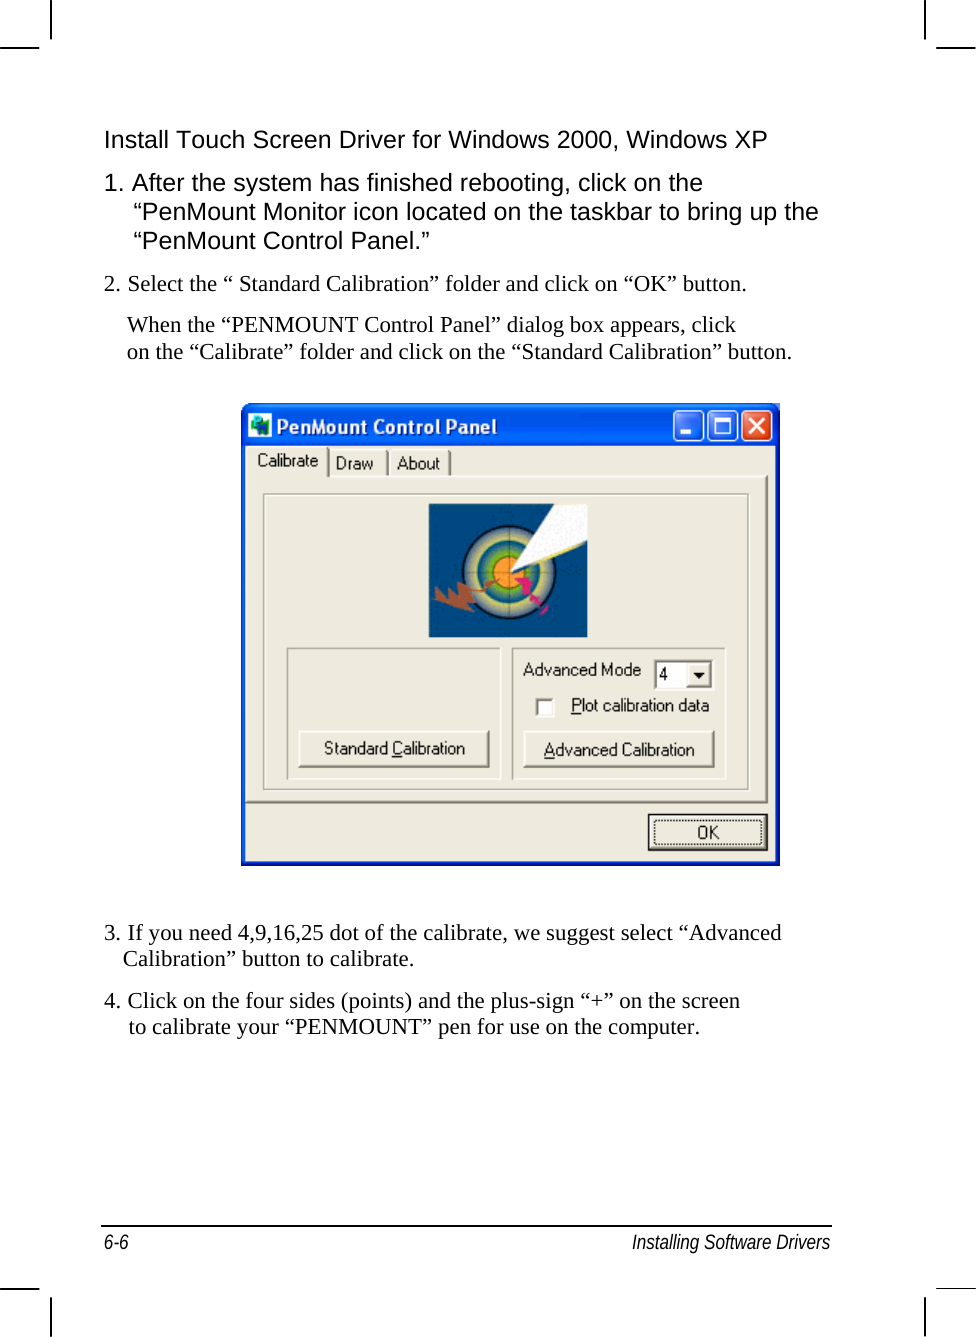  Install Touch Screen Driver for Windows 2000, Windows XP 1. After the system has finished rebooting, click on the     “PenMount Monitor icon located on the taskbar to bring up the     “PenMount Control Panel.” 2. Select the “ Standard Calibration” folder and click on “OK” button. When the “PENMOUNT Control Panel” dialog box appears, click on the “Calibrate” folder and click on the “Standard Calibration” button.                  3. If you need 4,9,16,25 dot of the calibrate, we suggest select “Advanced    Calibration” button to calibrate. 4. Click on the four sides (points) and the plus-sign “+” on the screen     to calibrate your “PENMOUNT” pen for use on the computer. 6-6  Installing Software Drivers 